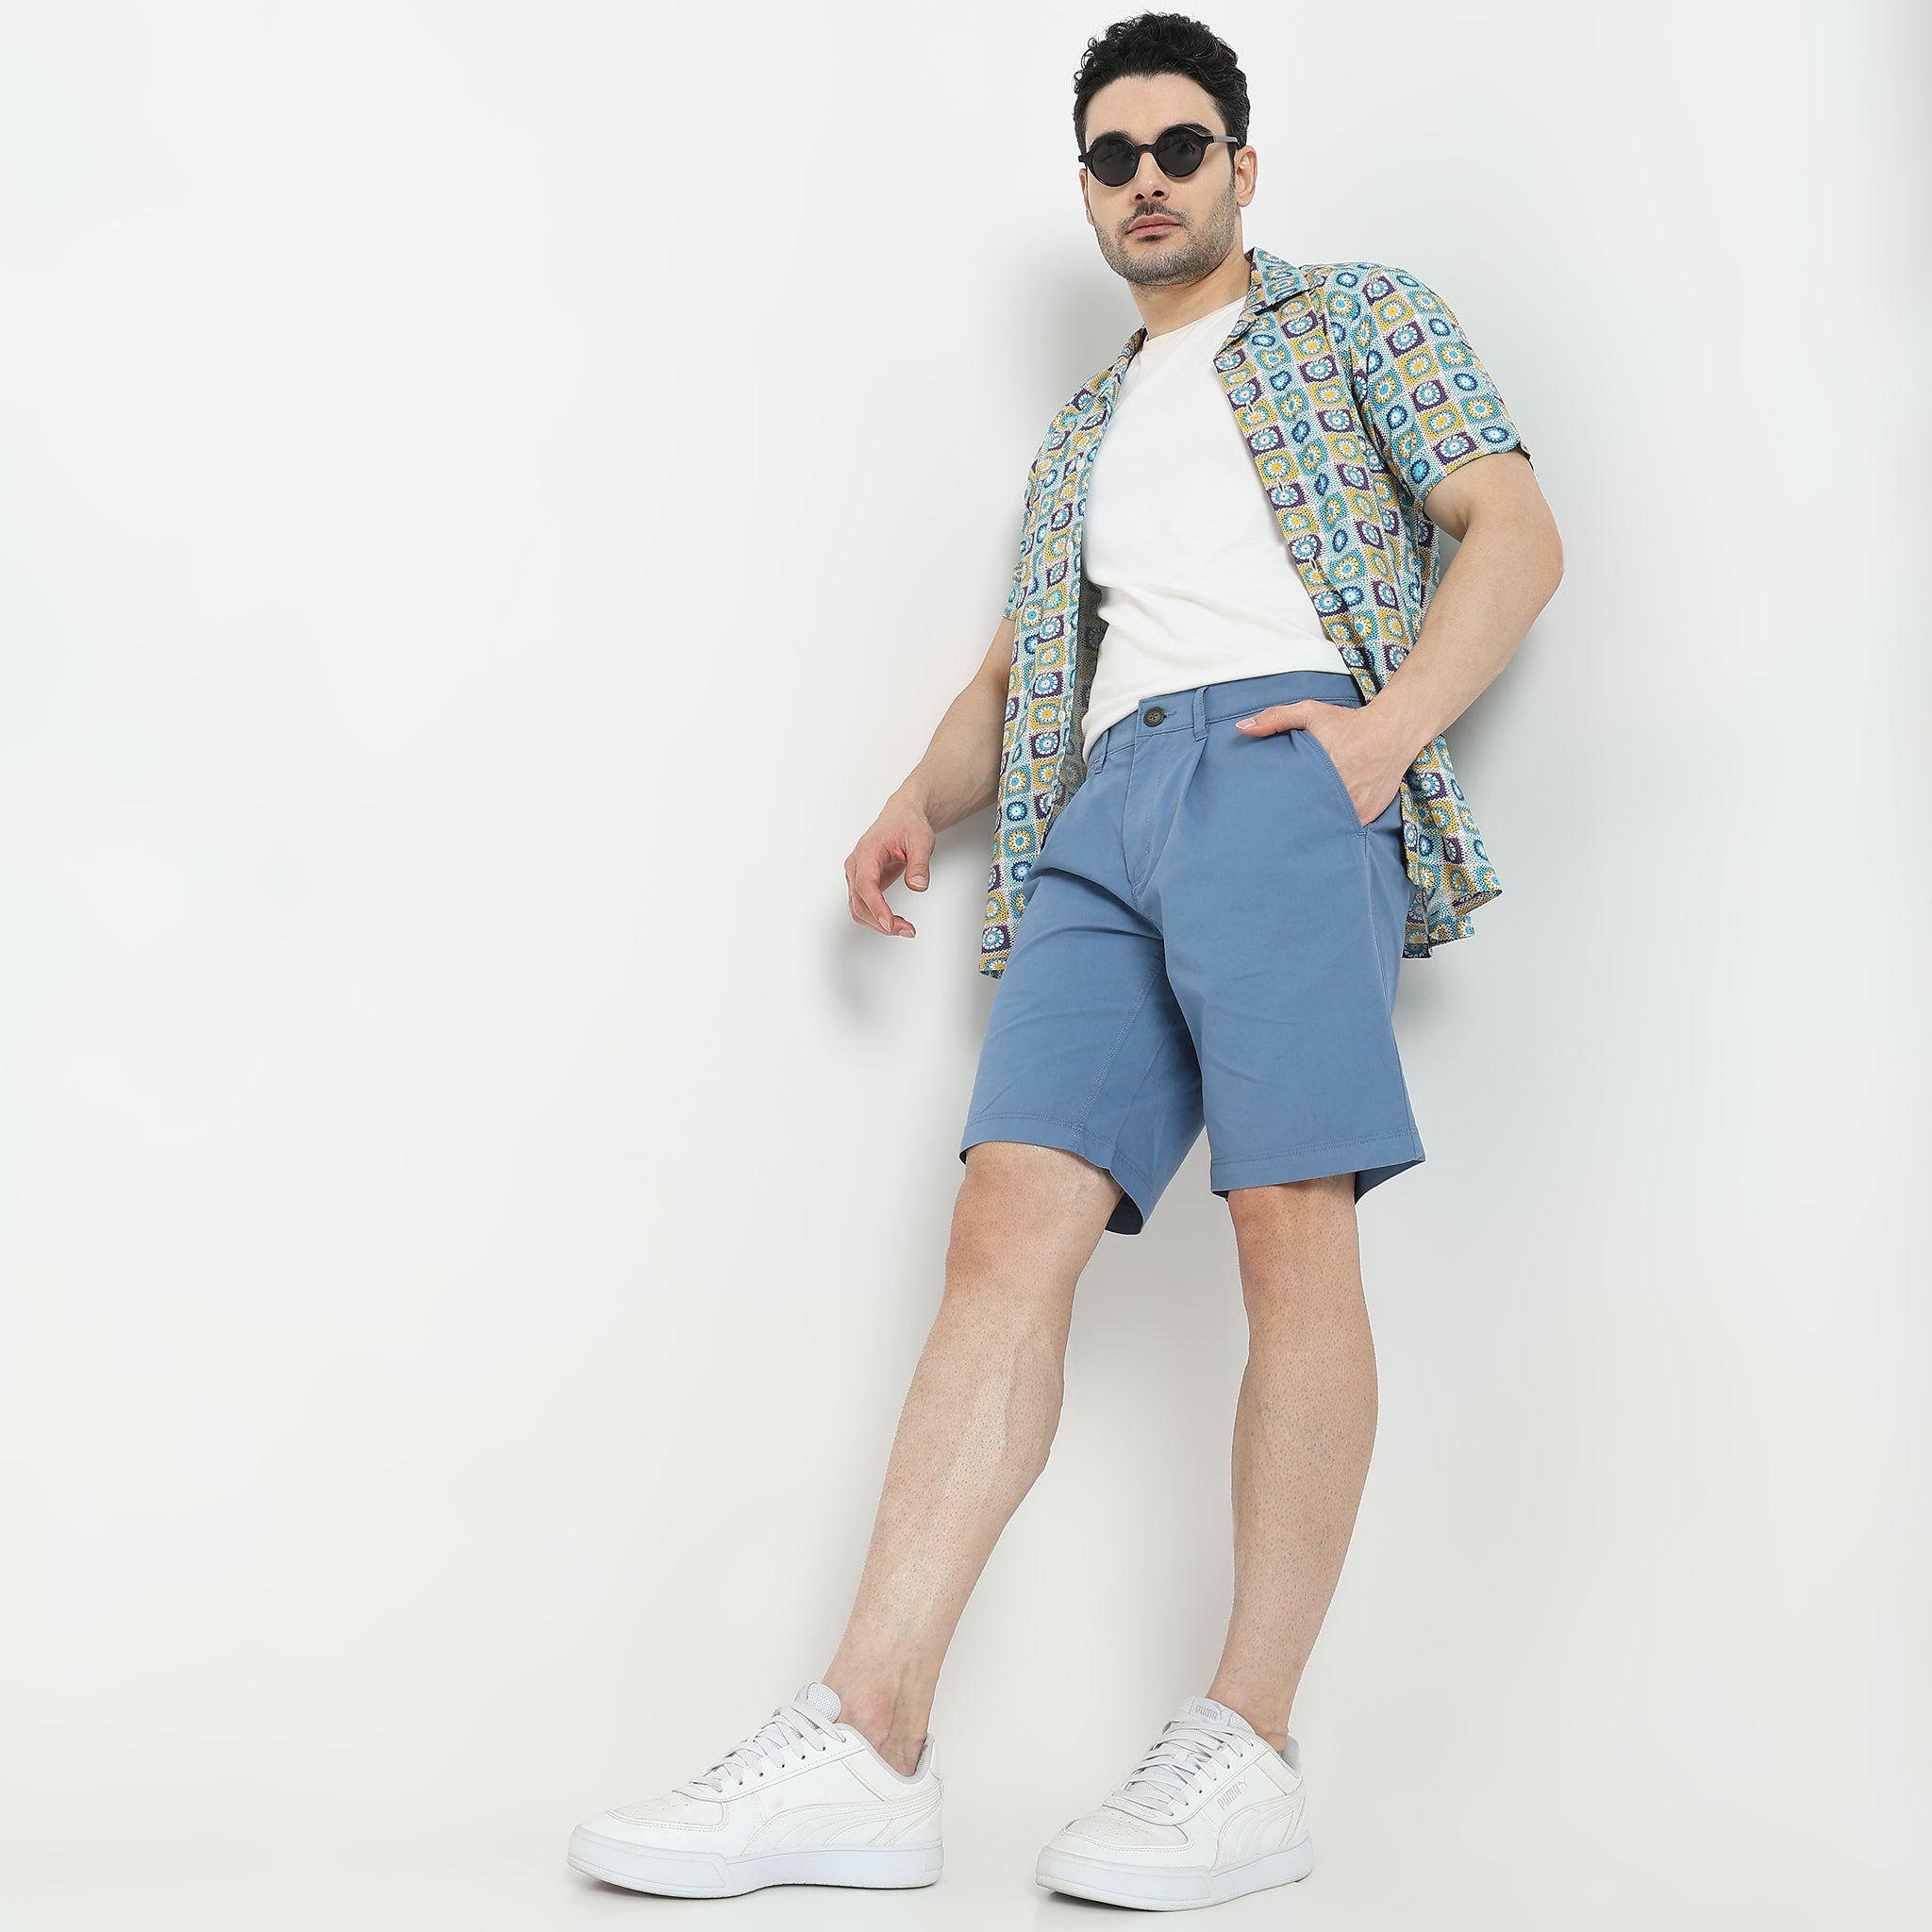 Buy Casual Shorts Online for Men in India